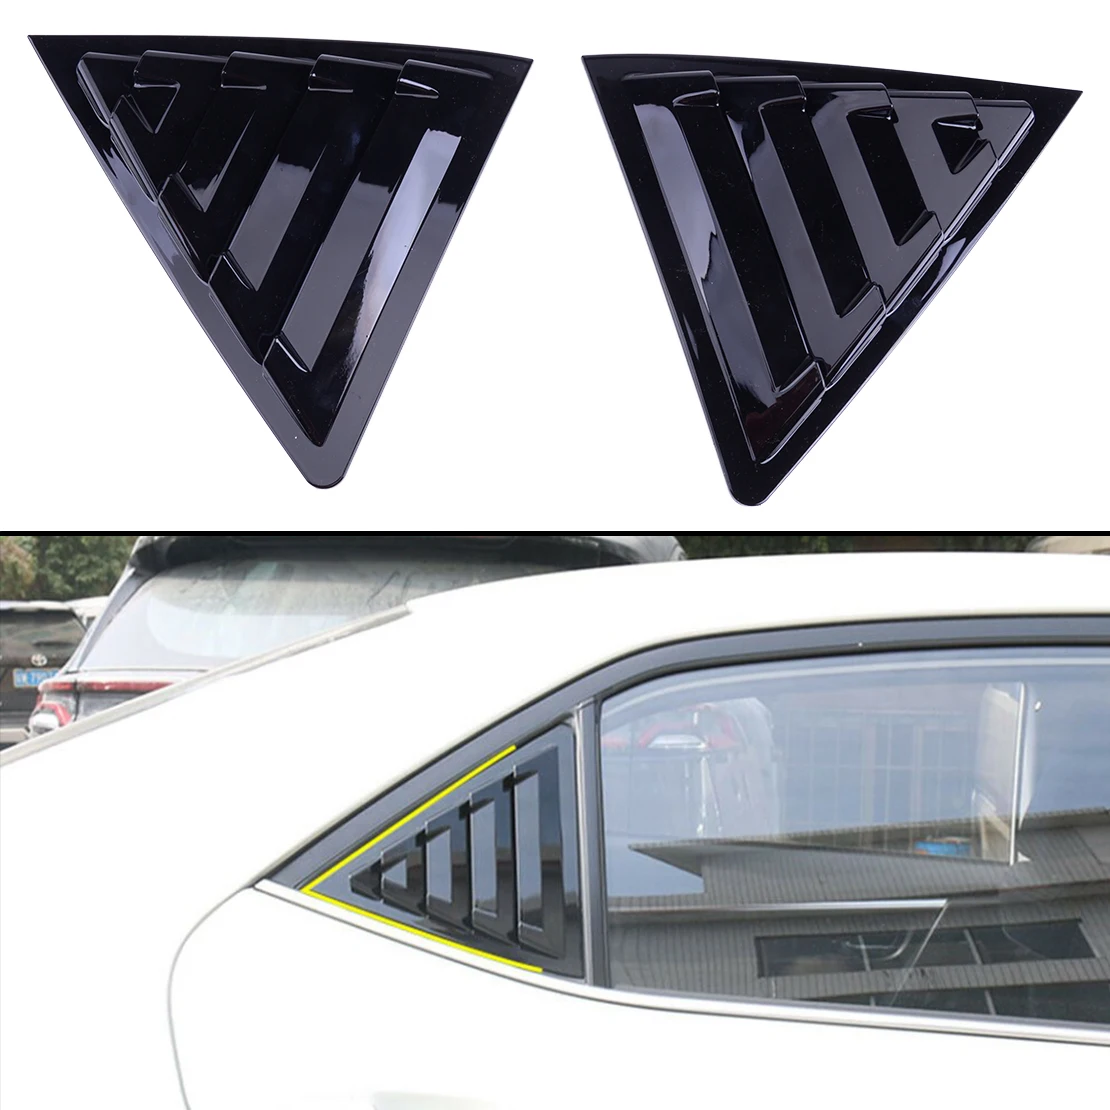 CITALL Glossy Black Rear Window Louver Sun Shade Vent Cover Fit for Toyota Camry Sedan 2018-2019 